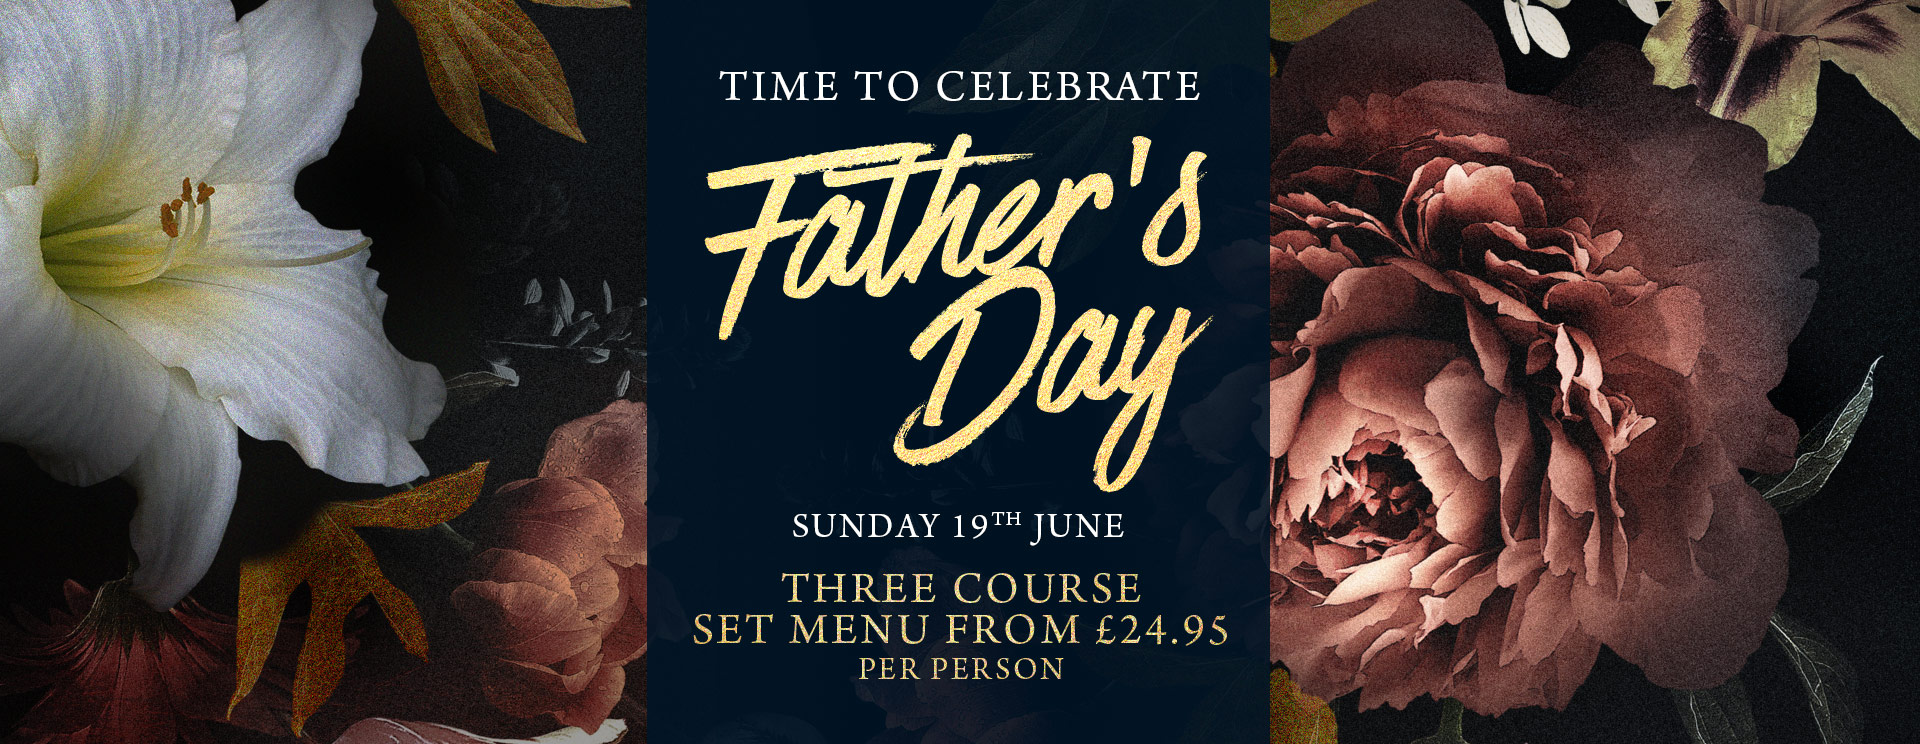 Fathers Day at Nags Head Inn Woking